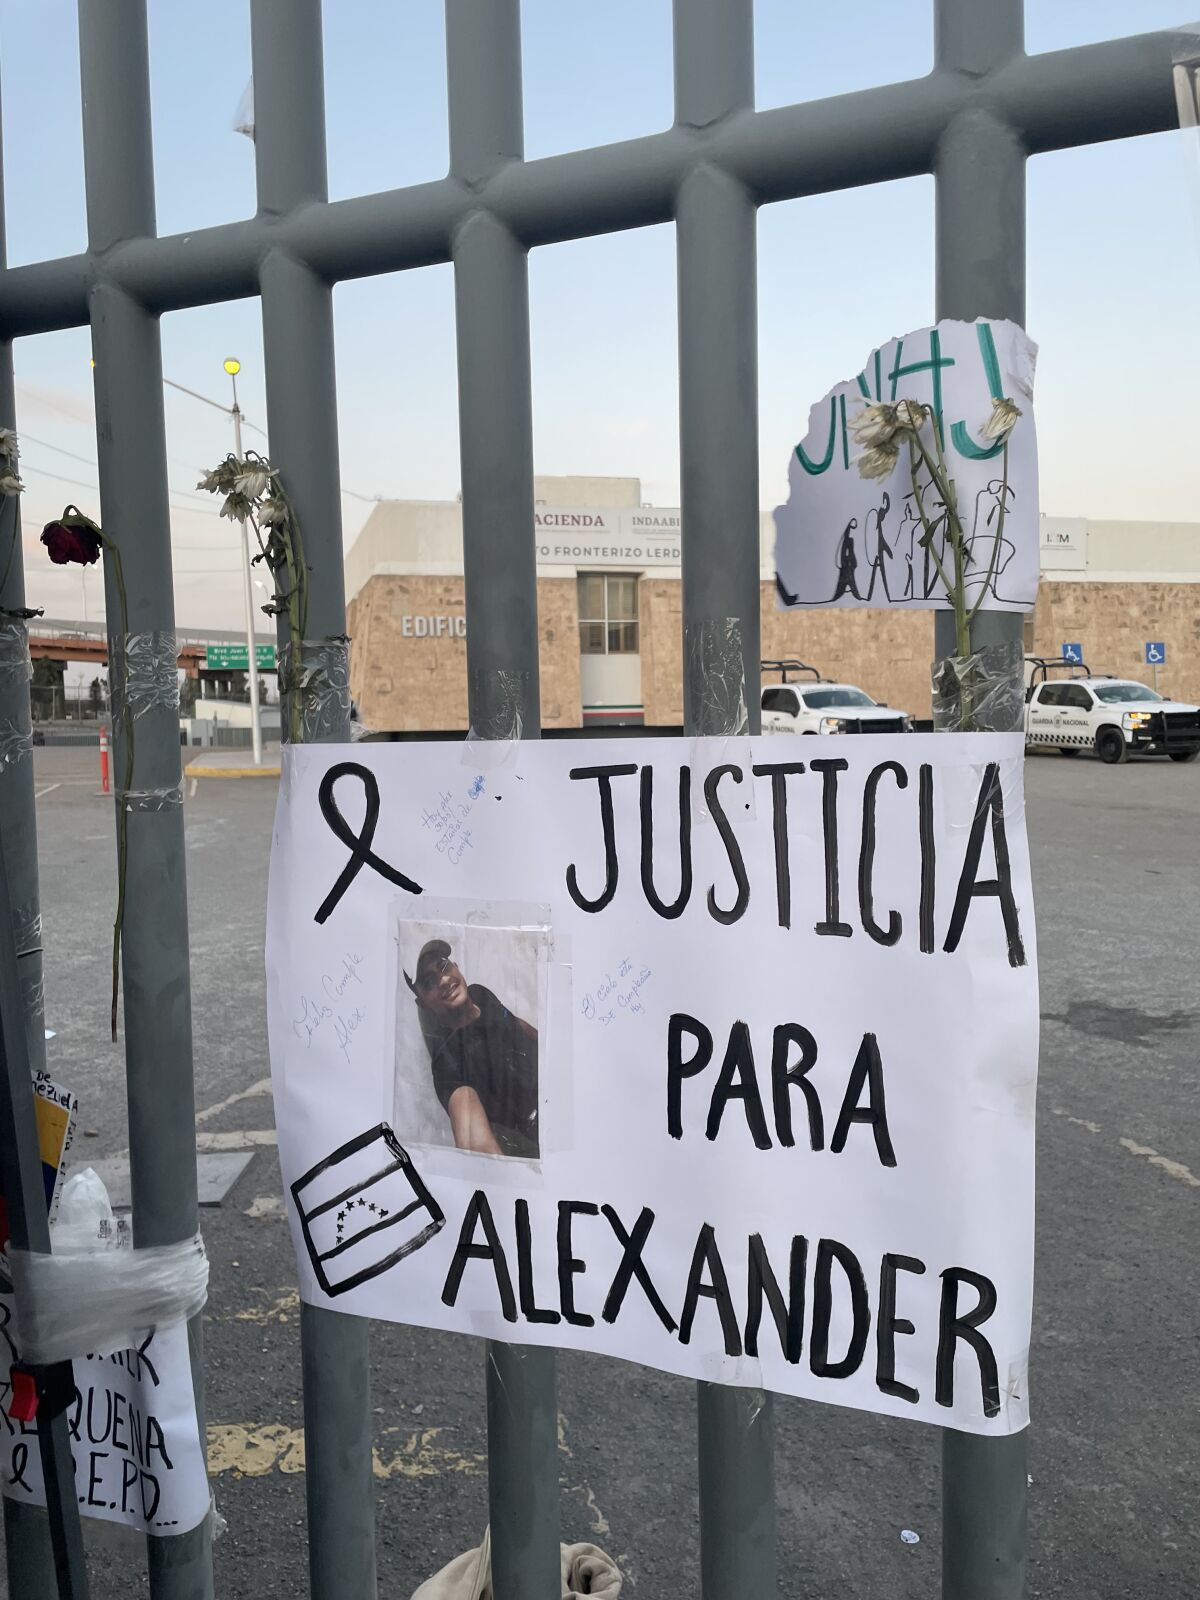 The inscription on the metal bars reads: "Justice for Alexander" 